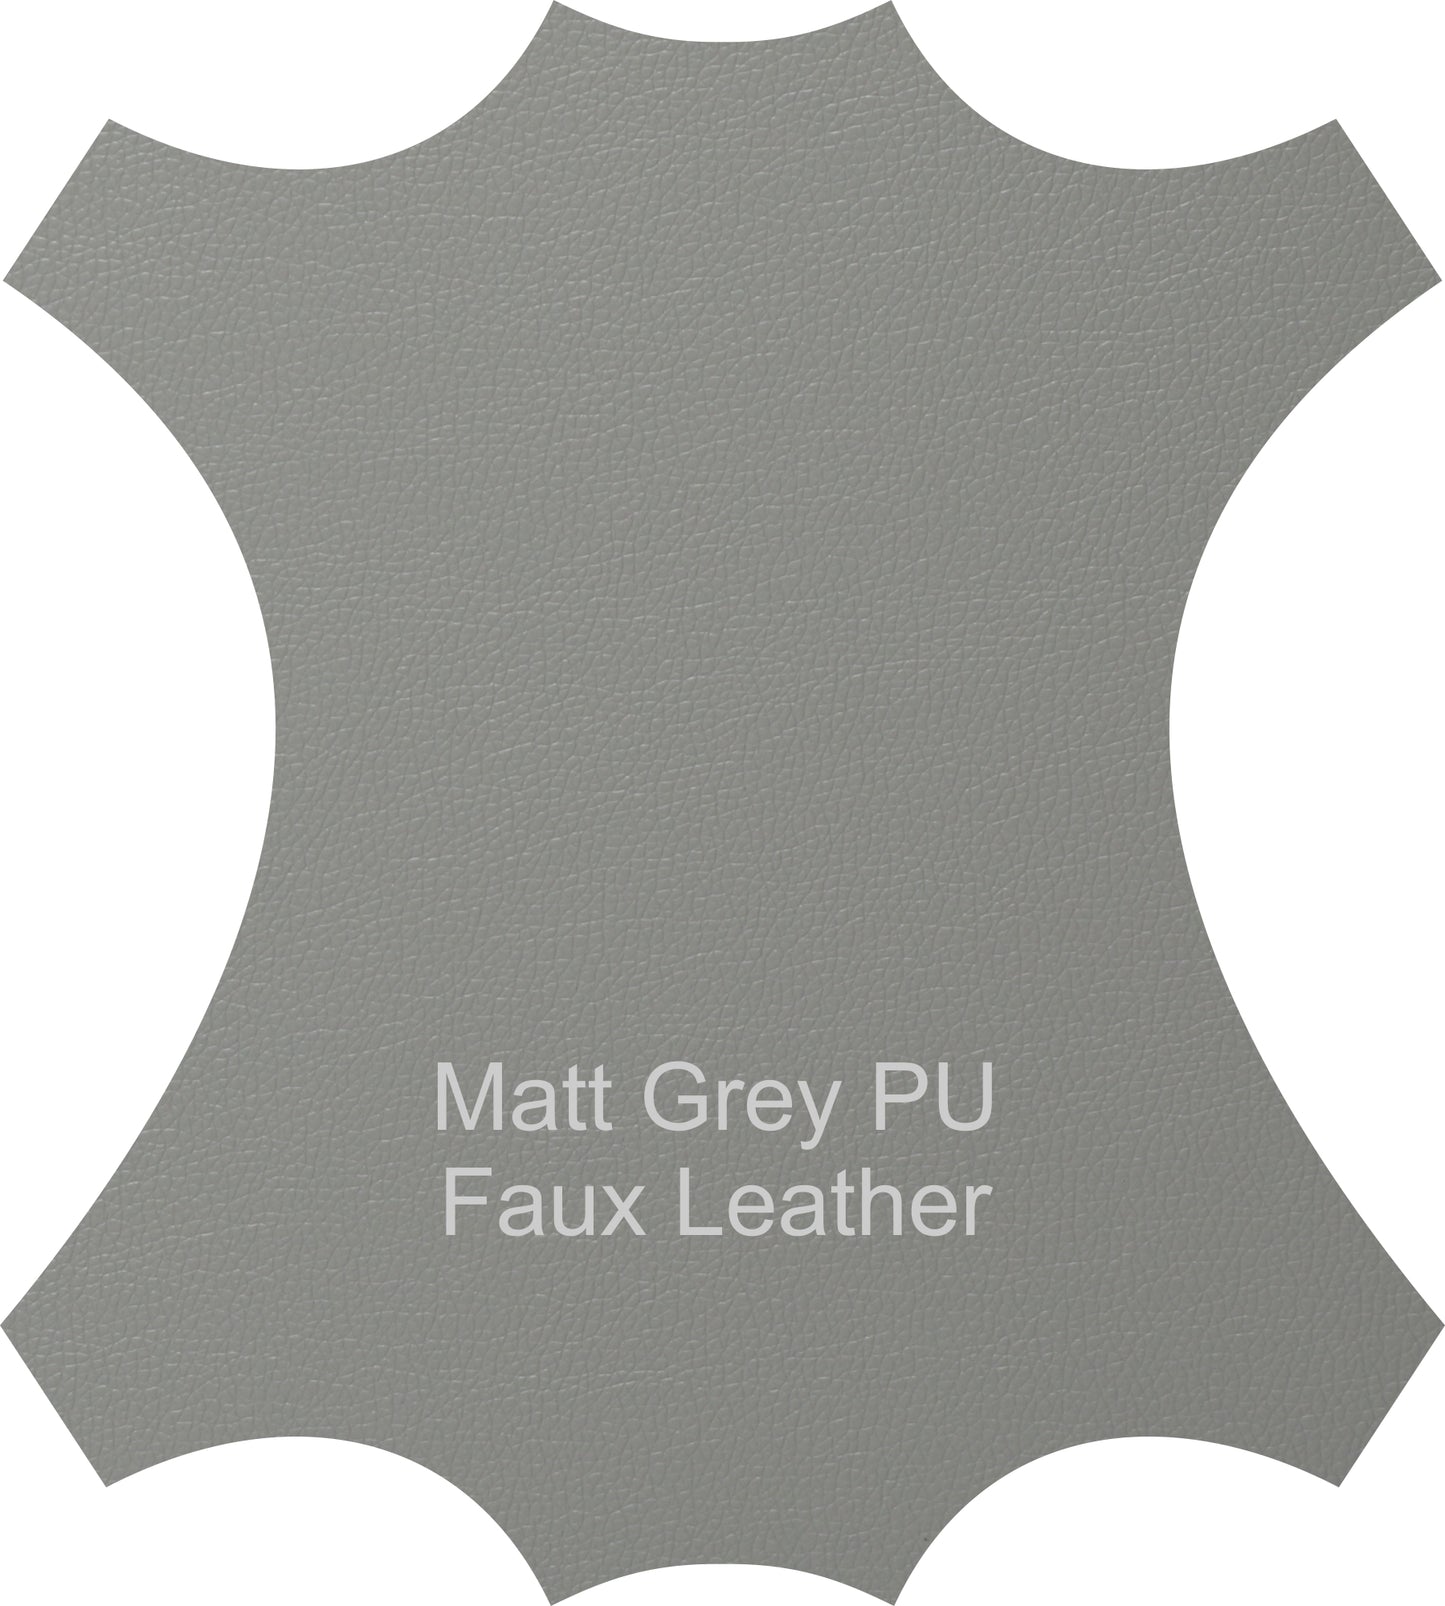 Matt Grey Torino Faux Leather Dining Chairs Swatch